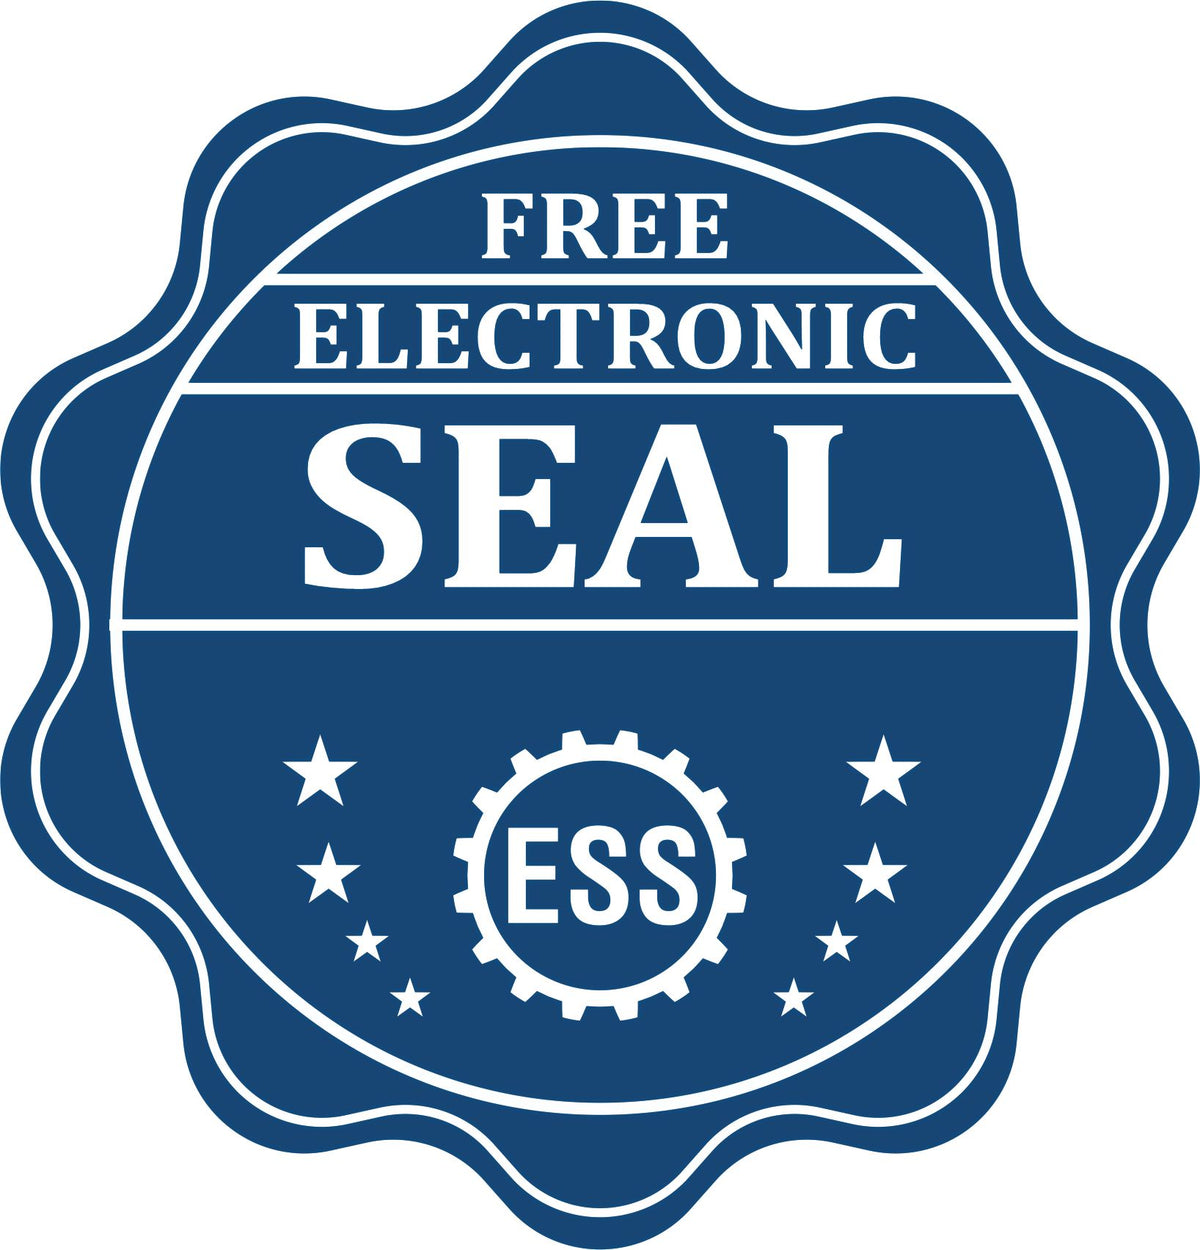 A badge showing a free electronic seal for the Soft Illinois Professional Engineer Seal with stars and the ESS gear on the emblem.